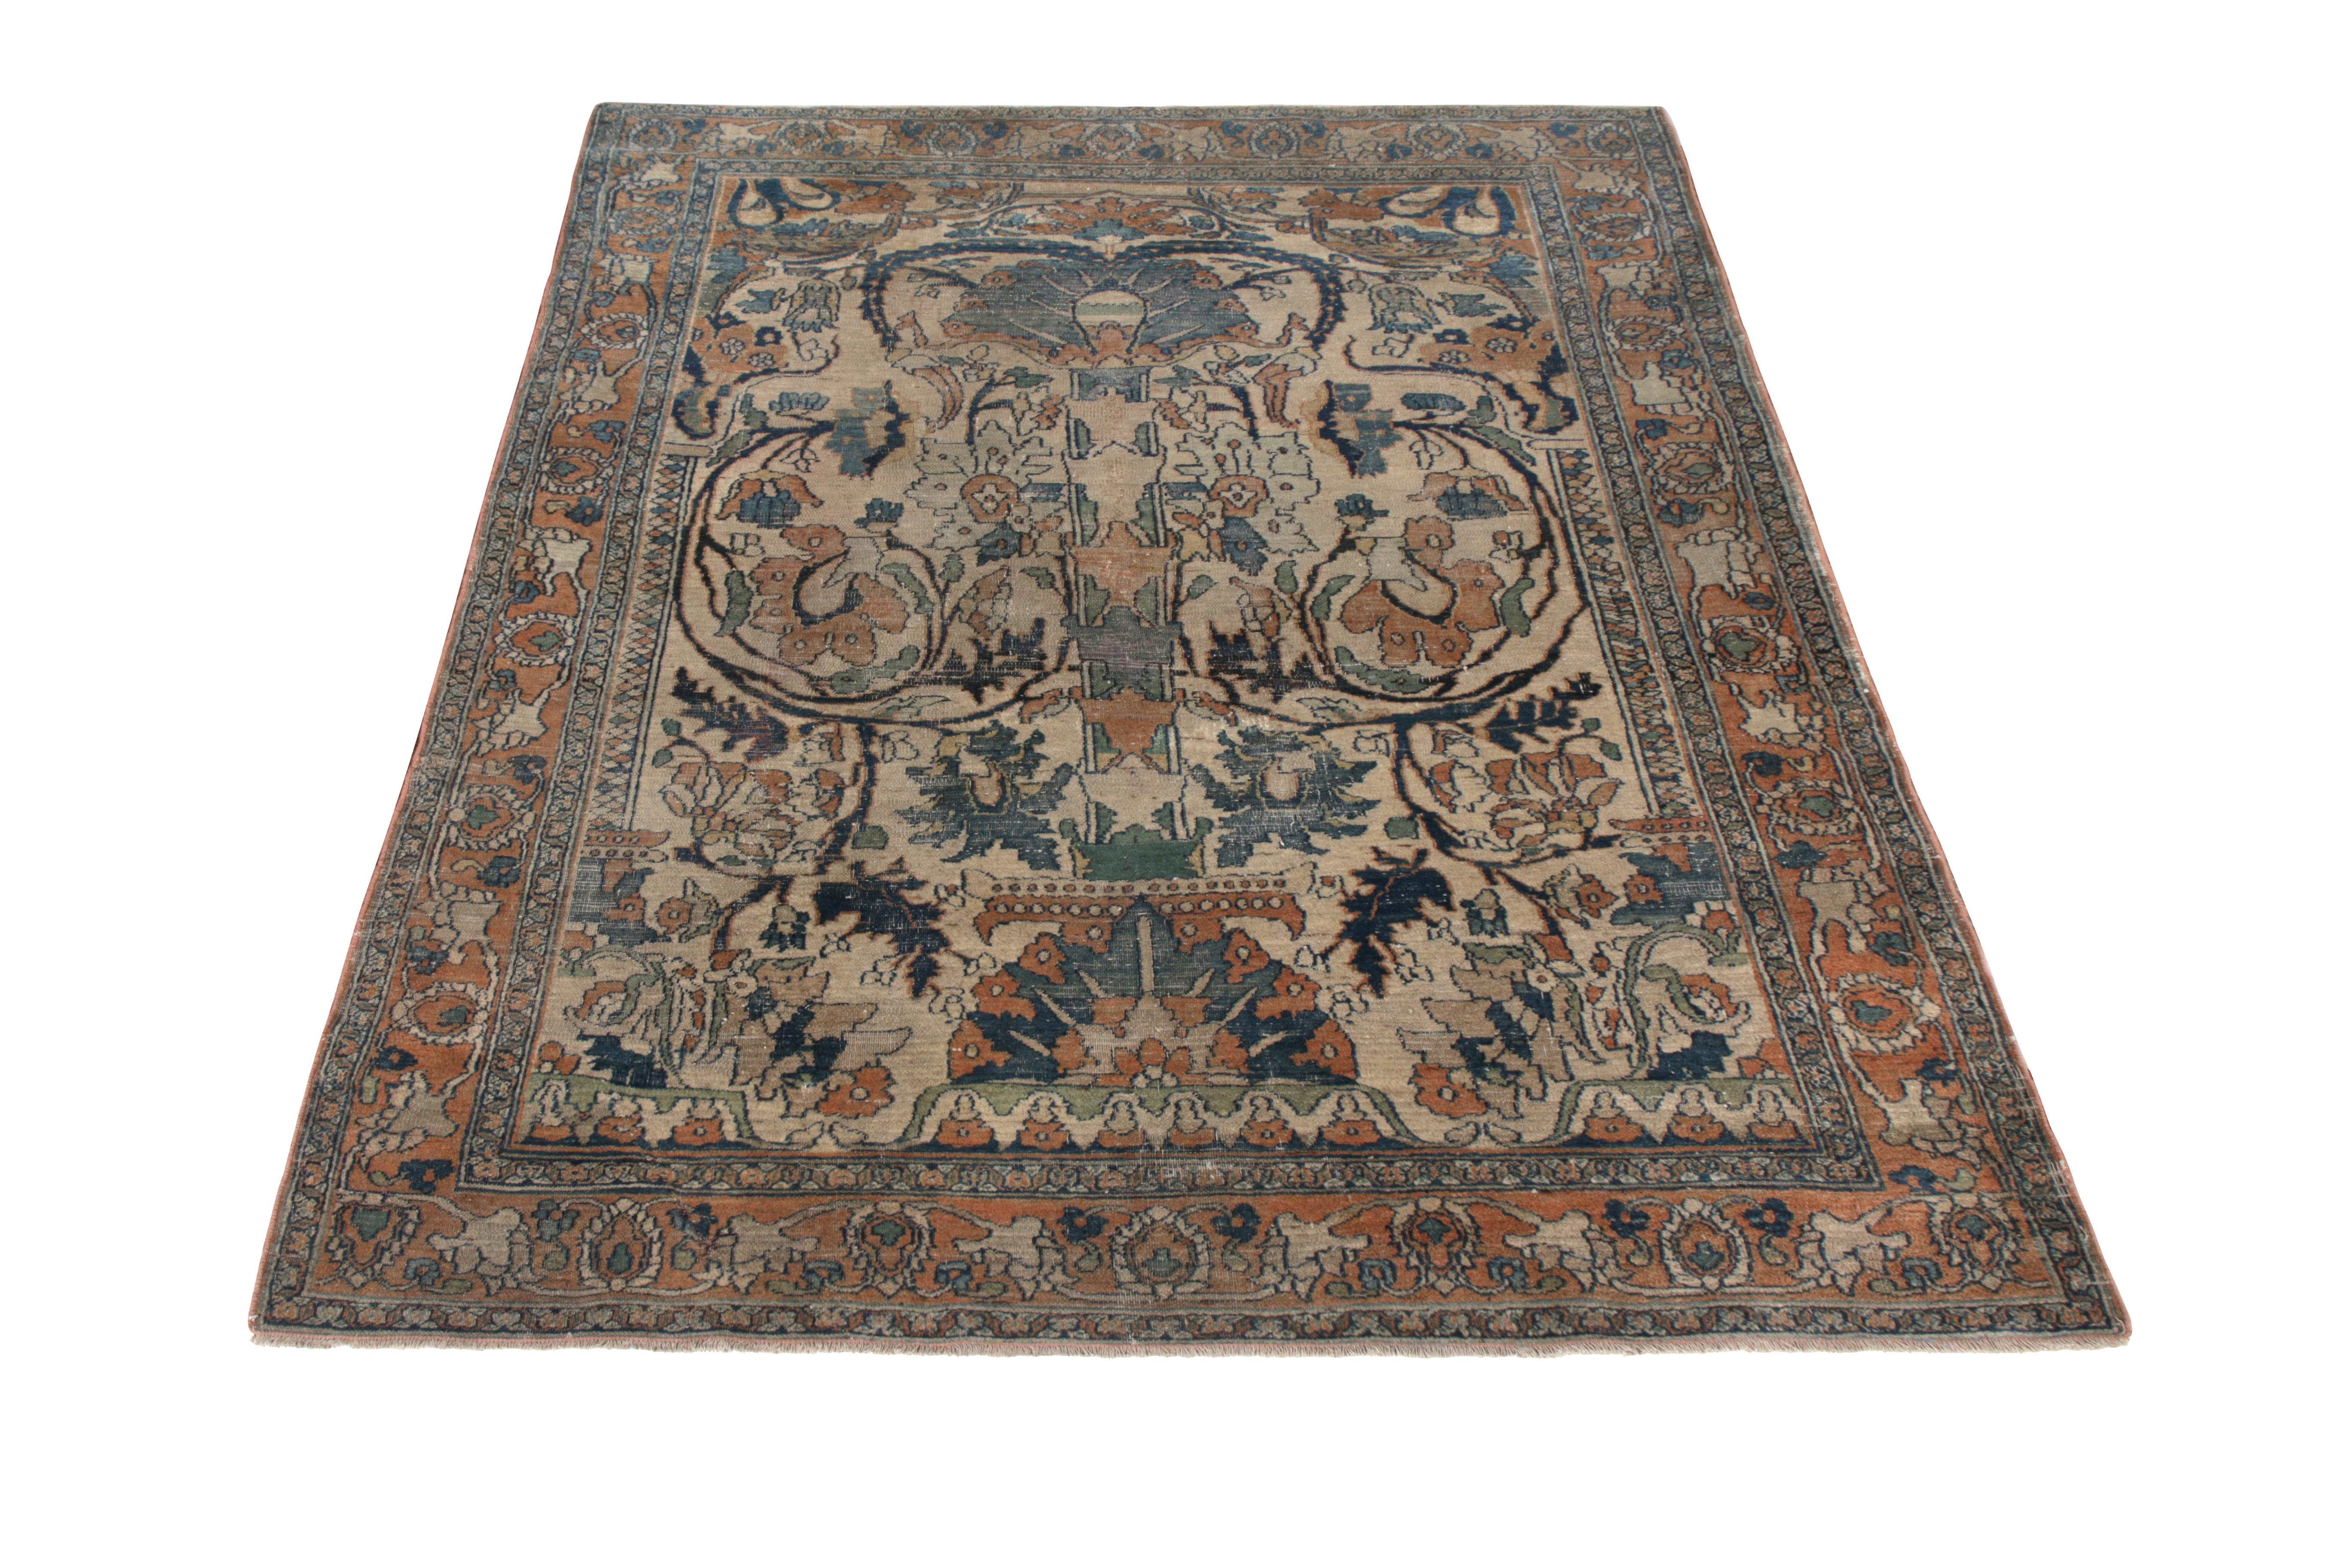 Hand-knotted in wool originating from circa 1860-1870, this 4 x 5 antique Persian rug connotes a traditional Doroksh rug design, one of the oldest pieces in our 19th-century collection from a family renowned among the most sought-after lineages of